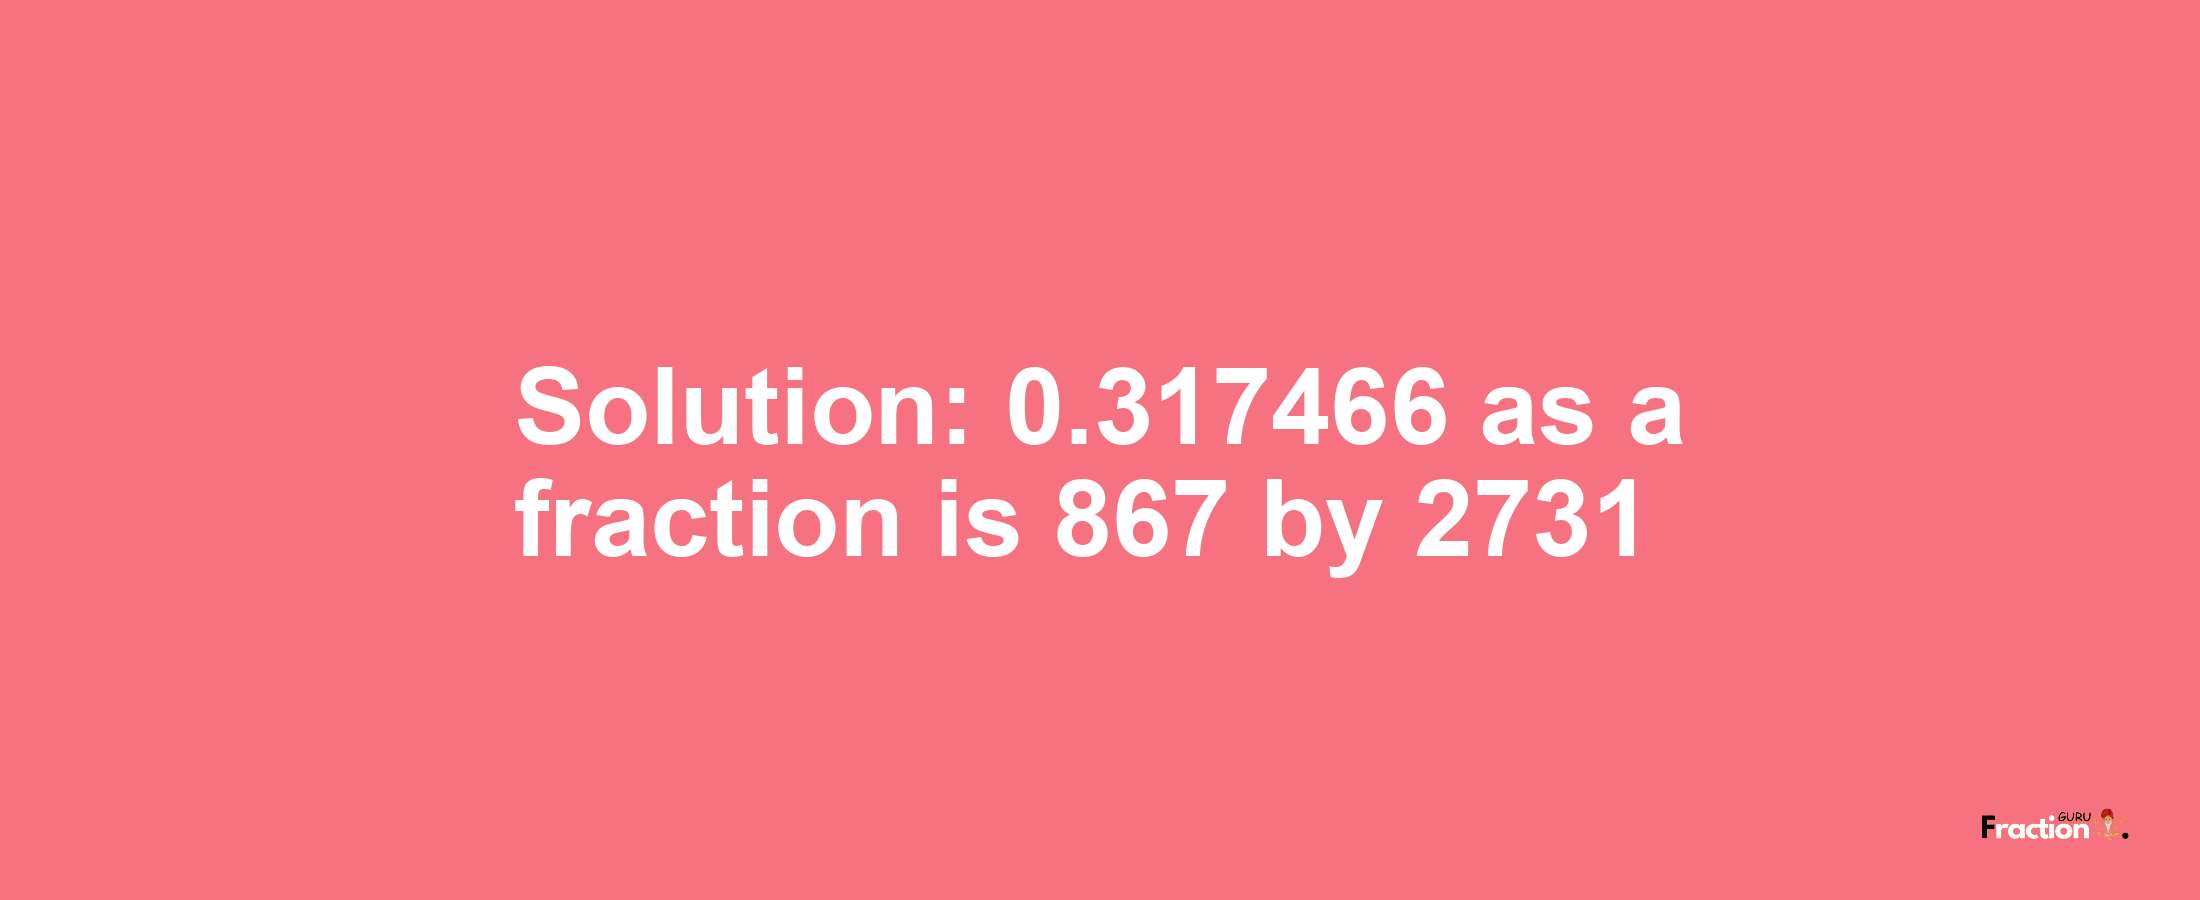 Solution:0.317466 as a fraction is 867/2731